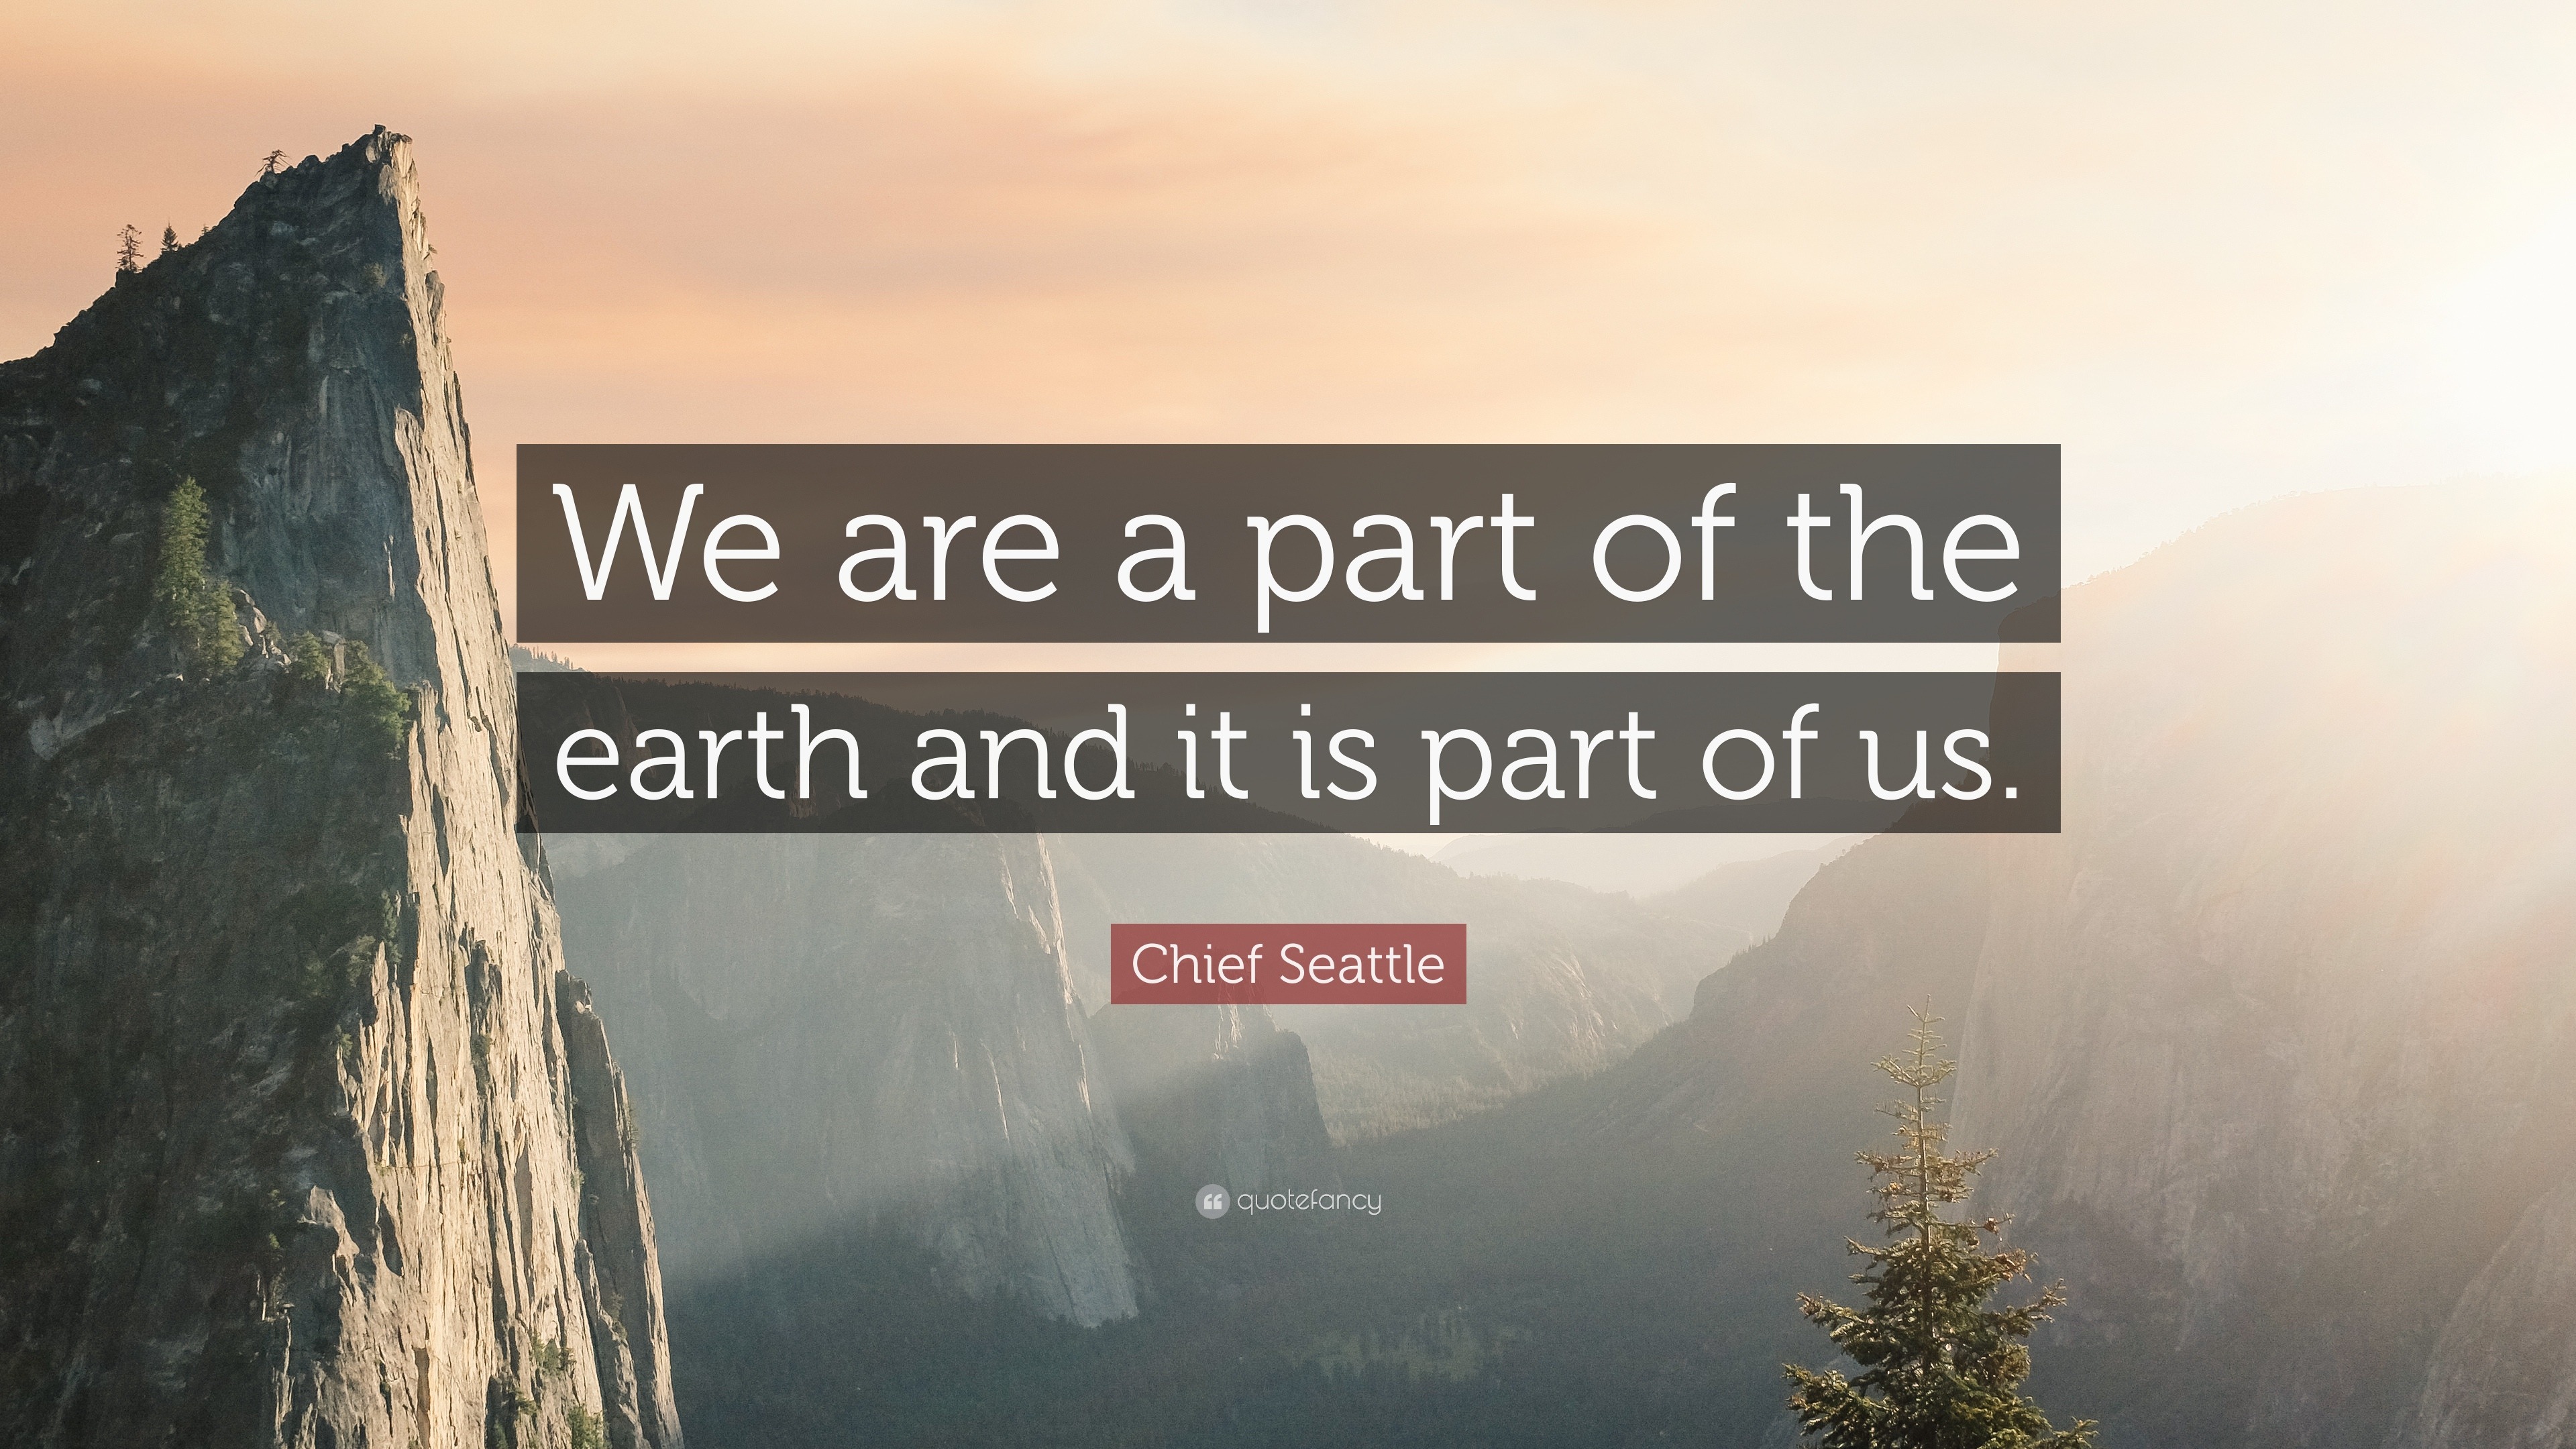 Chief Seattle Quote: “We are a part of the earth and it is part of us.”